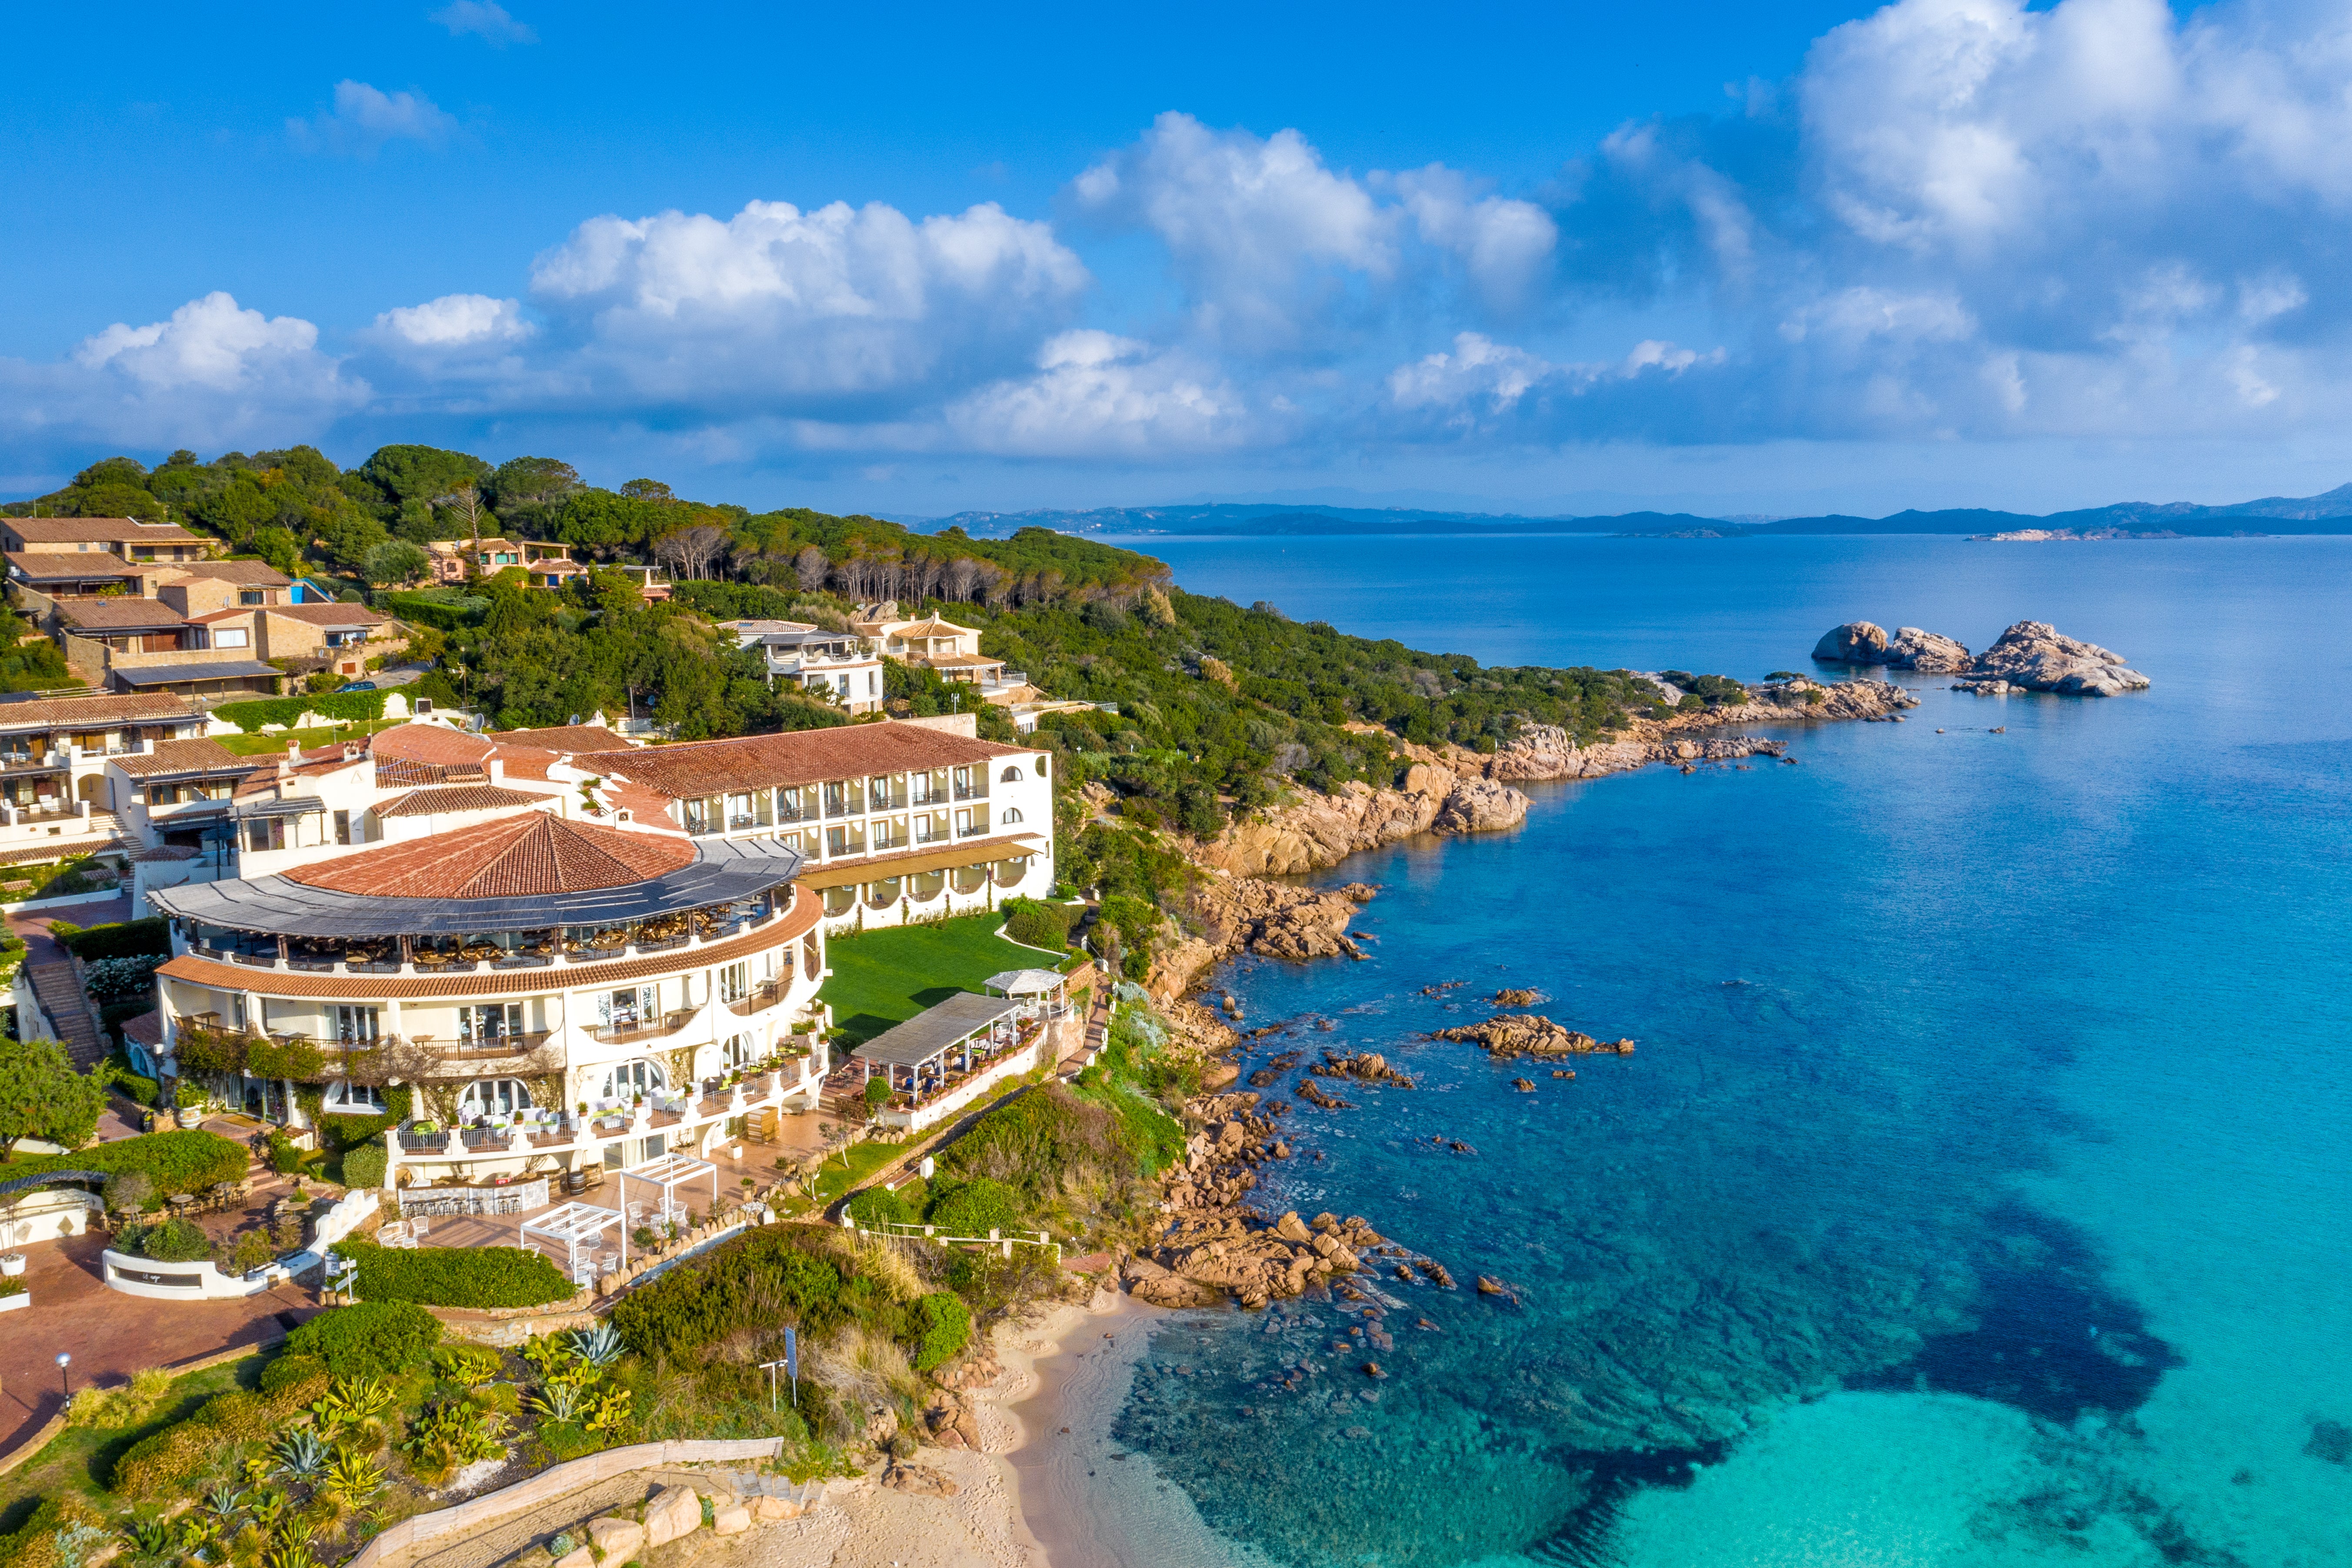 From riviera retreats to beachy resorts – such as the gorgeous Club Hotel Baja in Sardinia – Italy has a wealth of must-visit coastal resorts